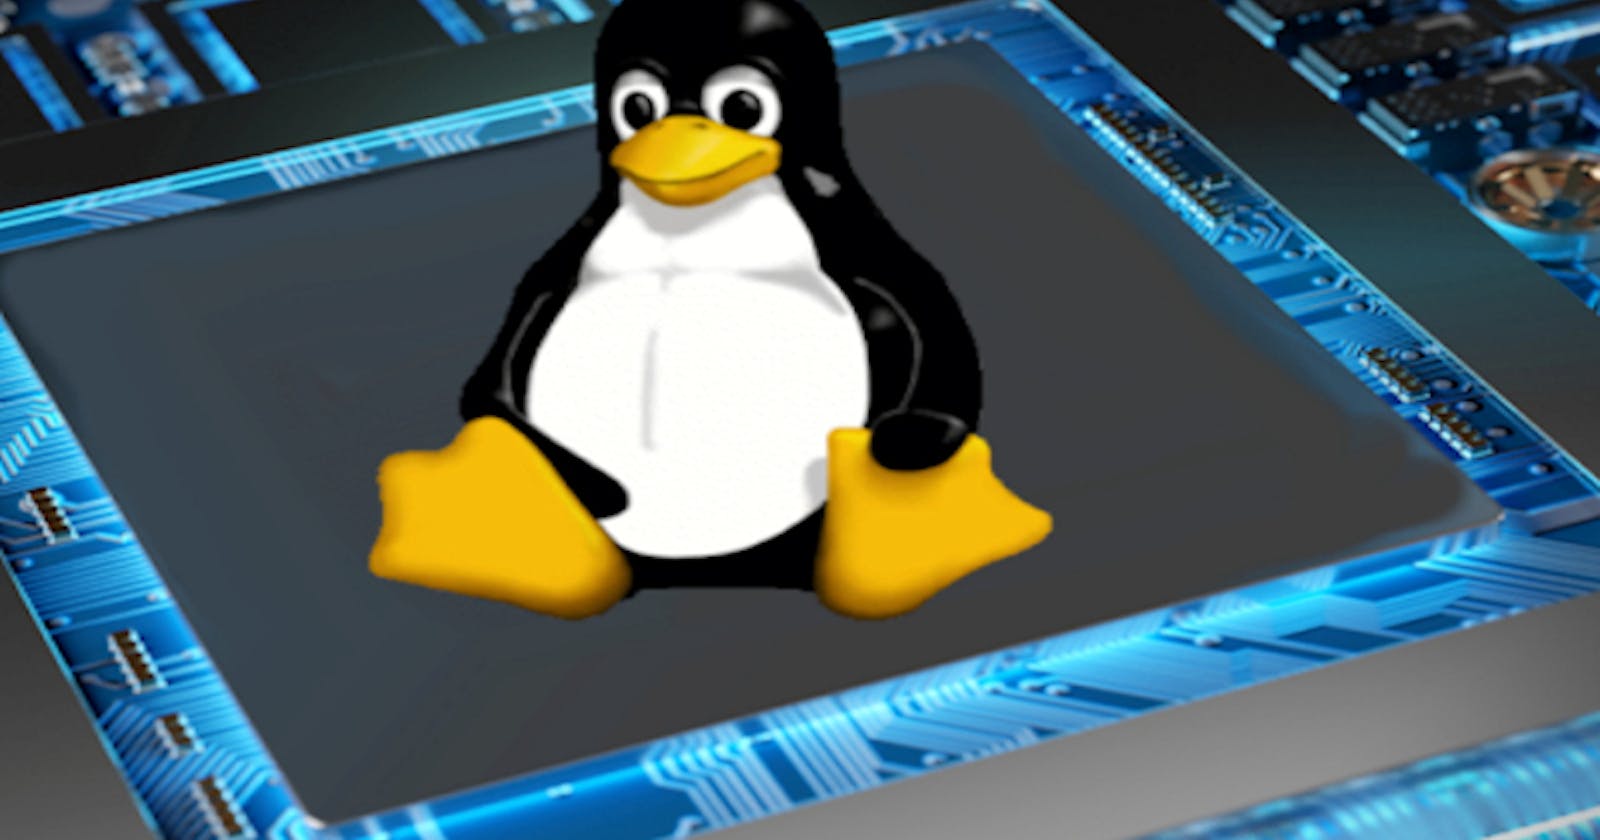 Getting started with Linux